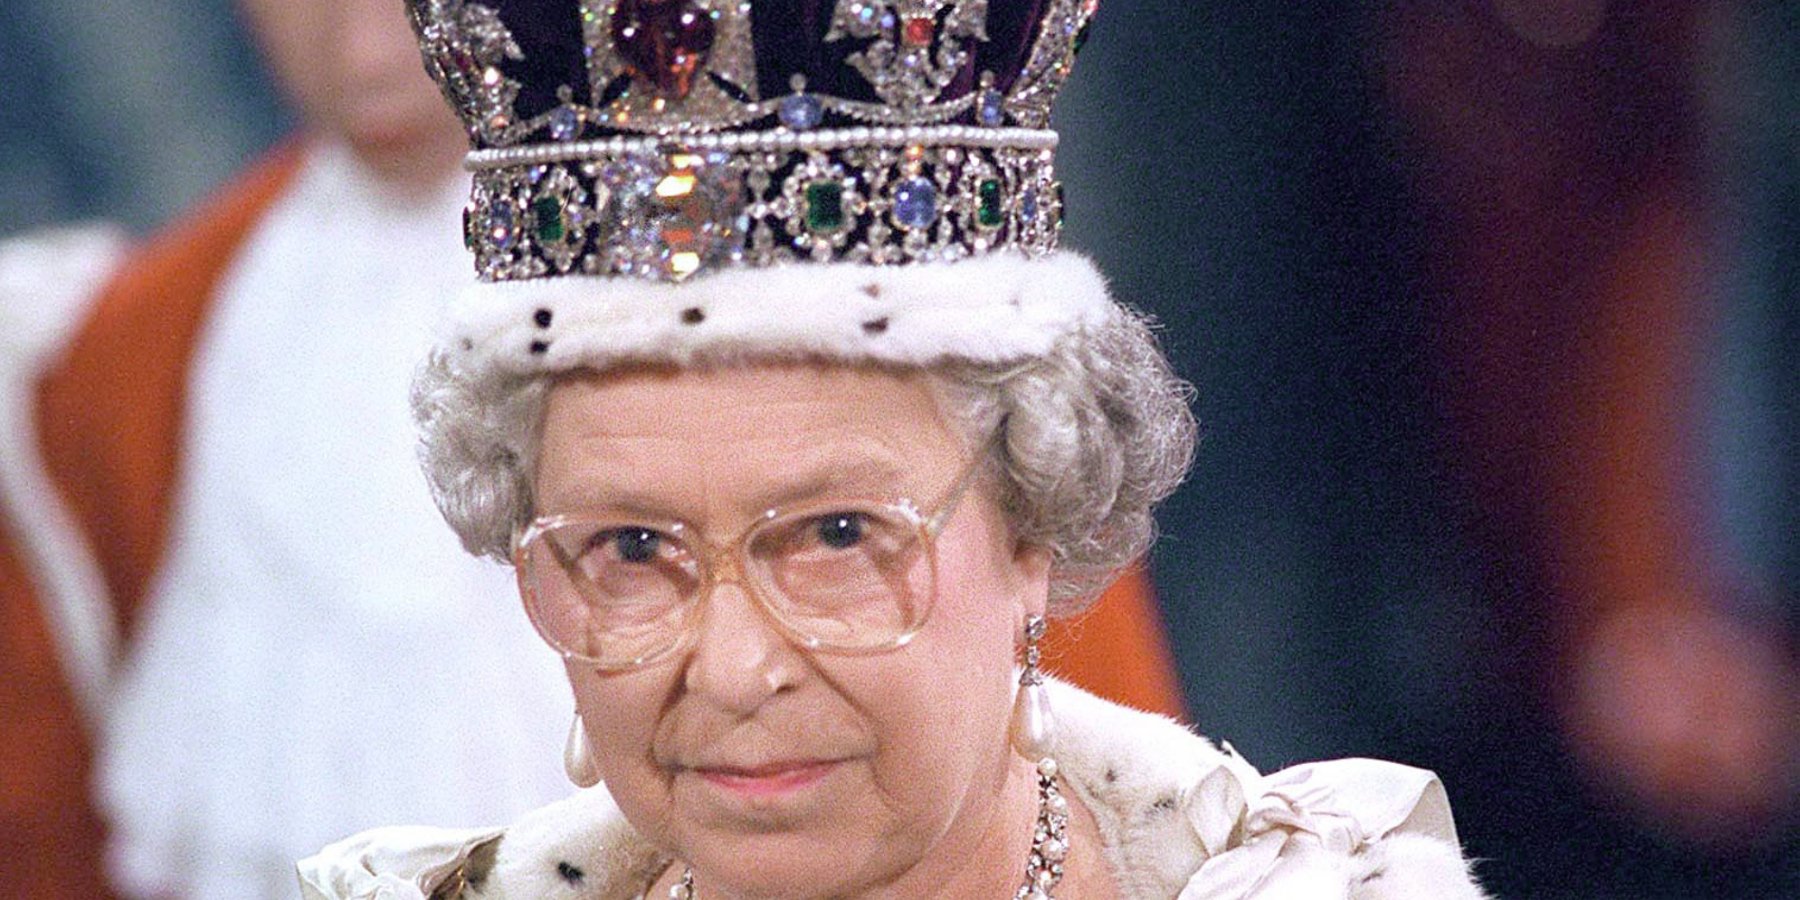 Queen Elizabeth II Had a Secret Crown That Was Worn Only Once at a Very Public Event